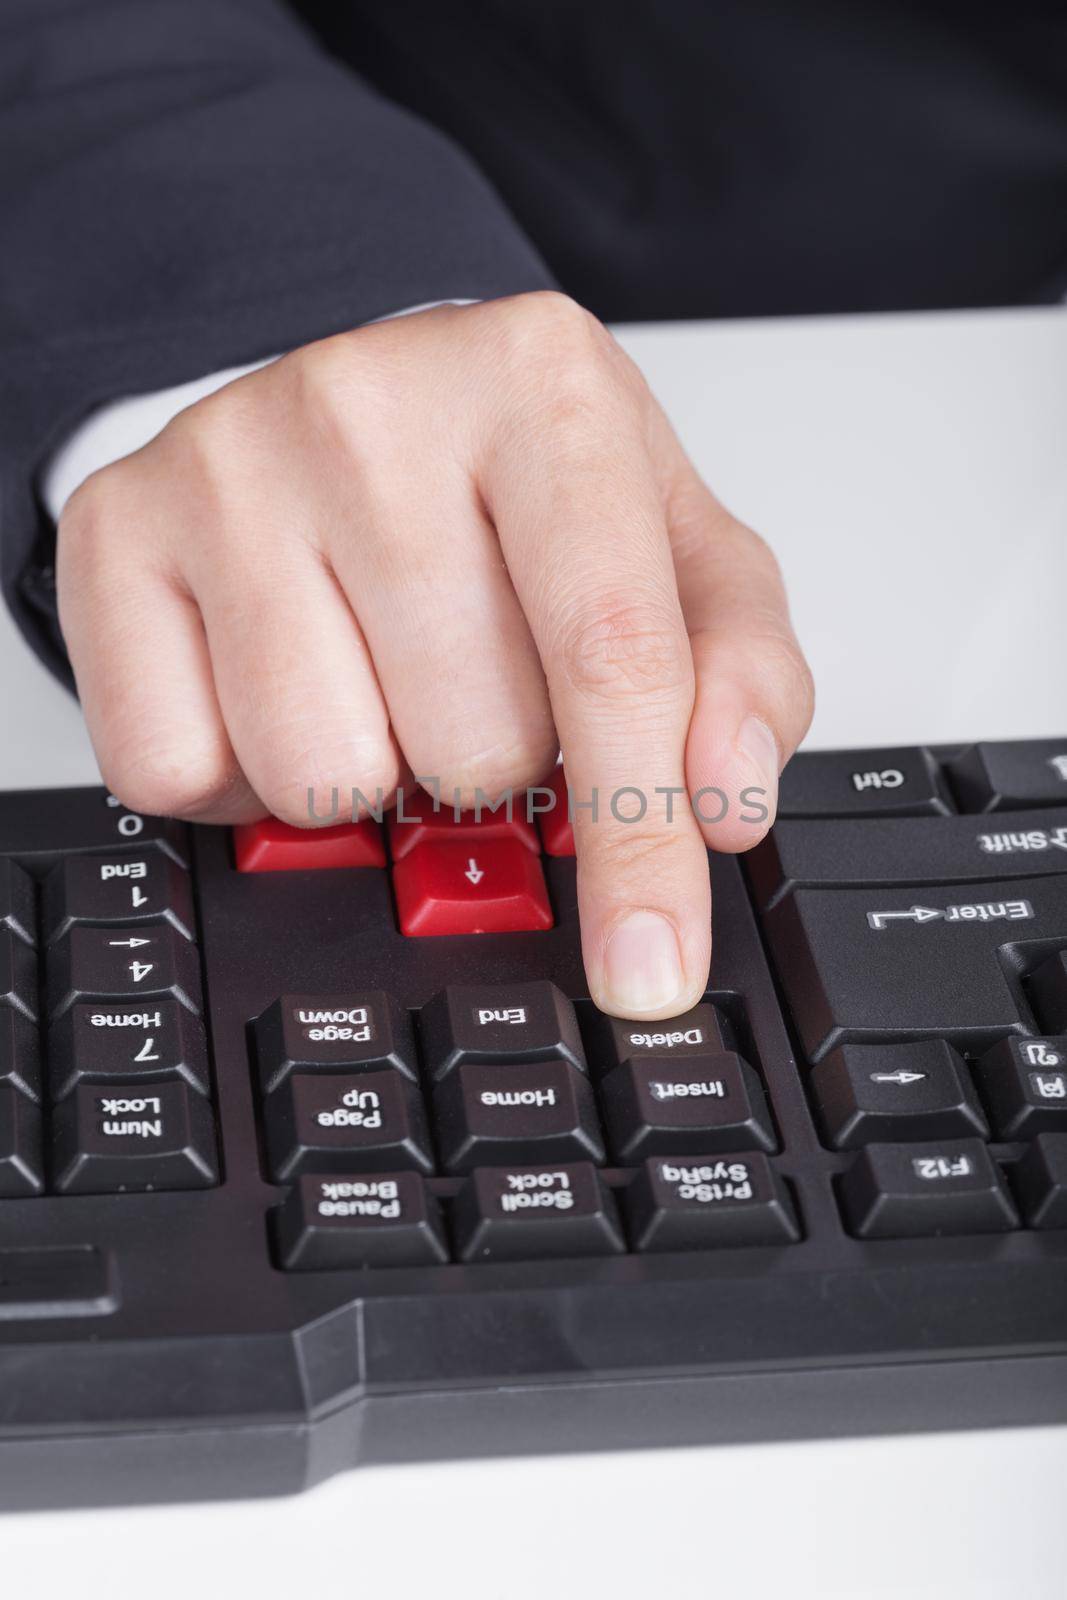 finger pushing delete button on a keyboard of computer